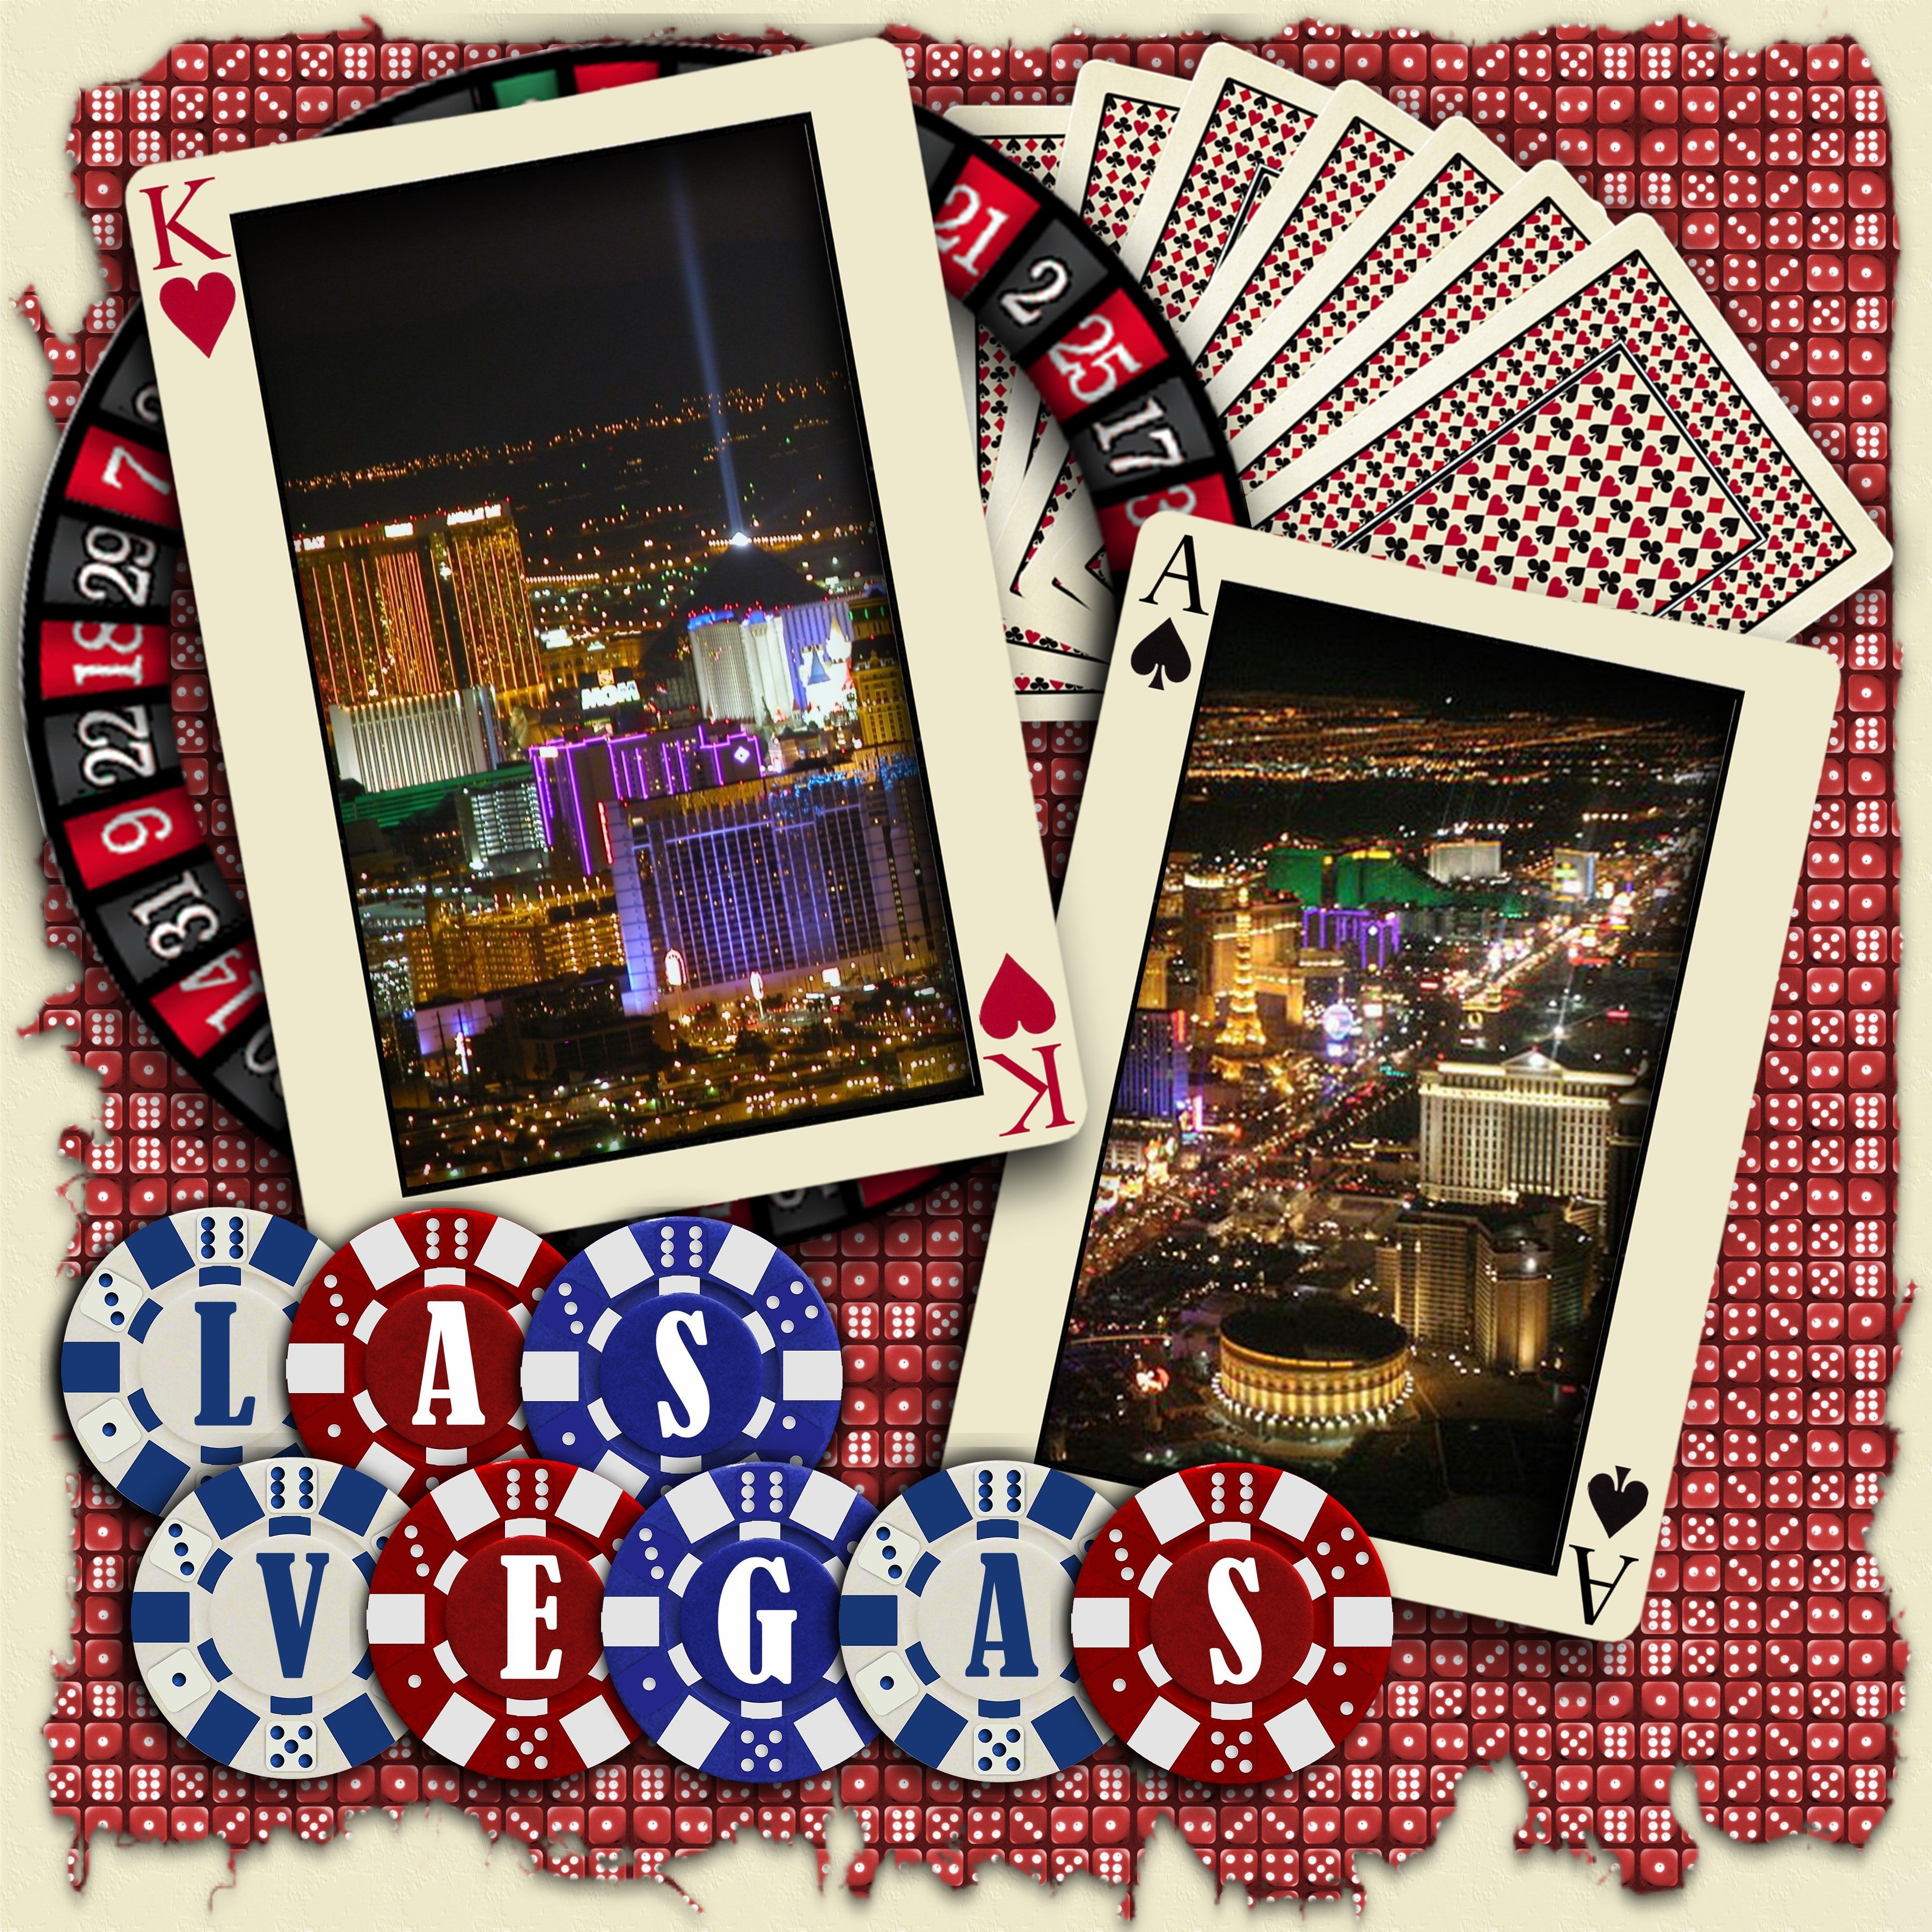 Las Vegas scrapbook page layouts | … score email this scrapbook uploaded feb 24 2012 viewed 645 times